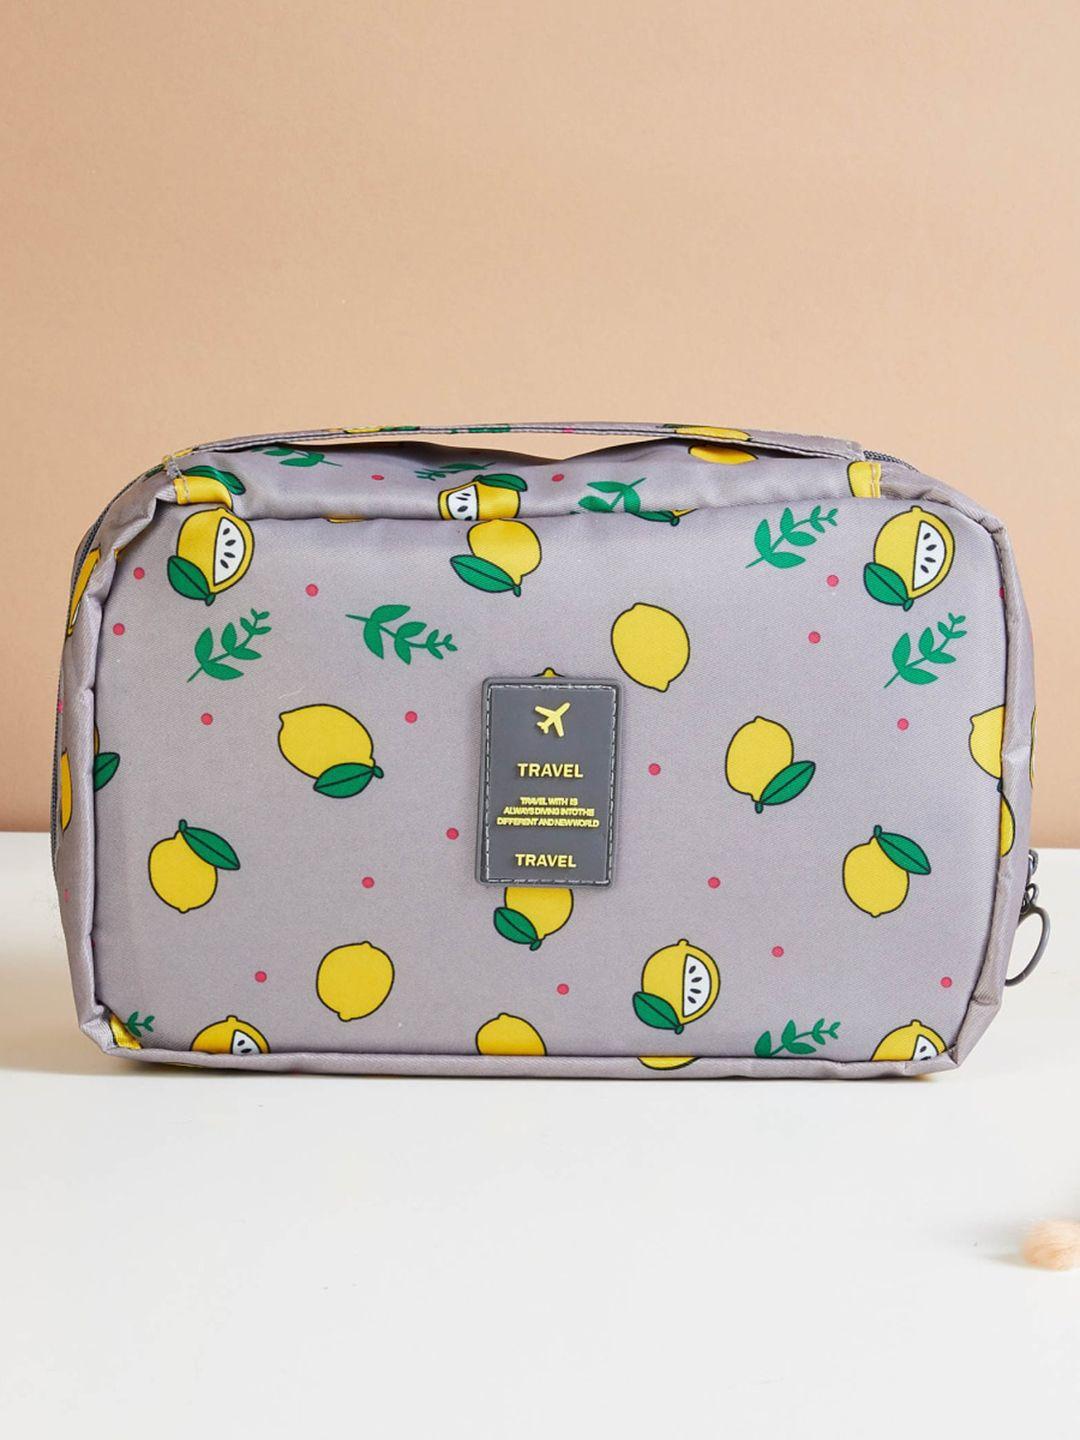 home centre corsica eclipse grey & yellow printed makeup kit travel pouch